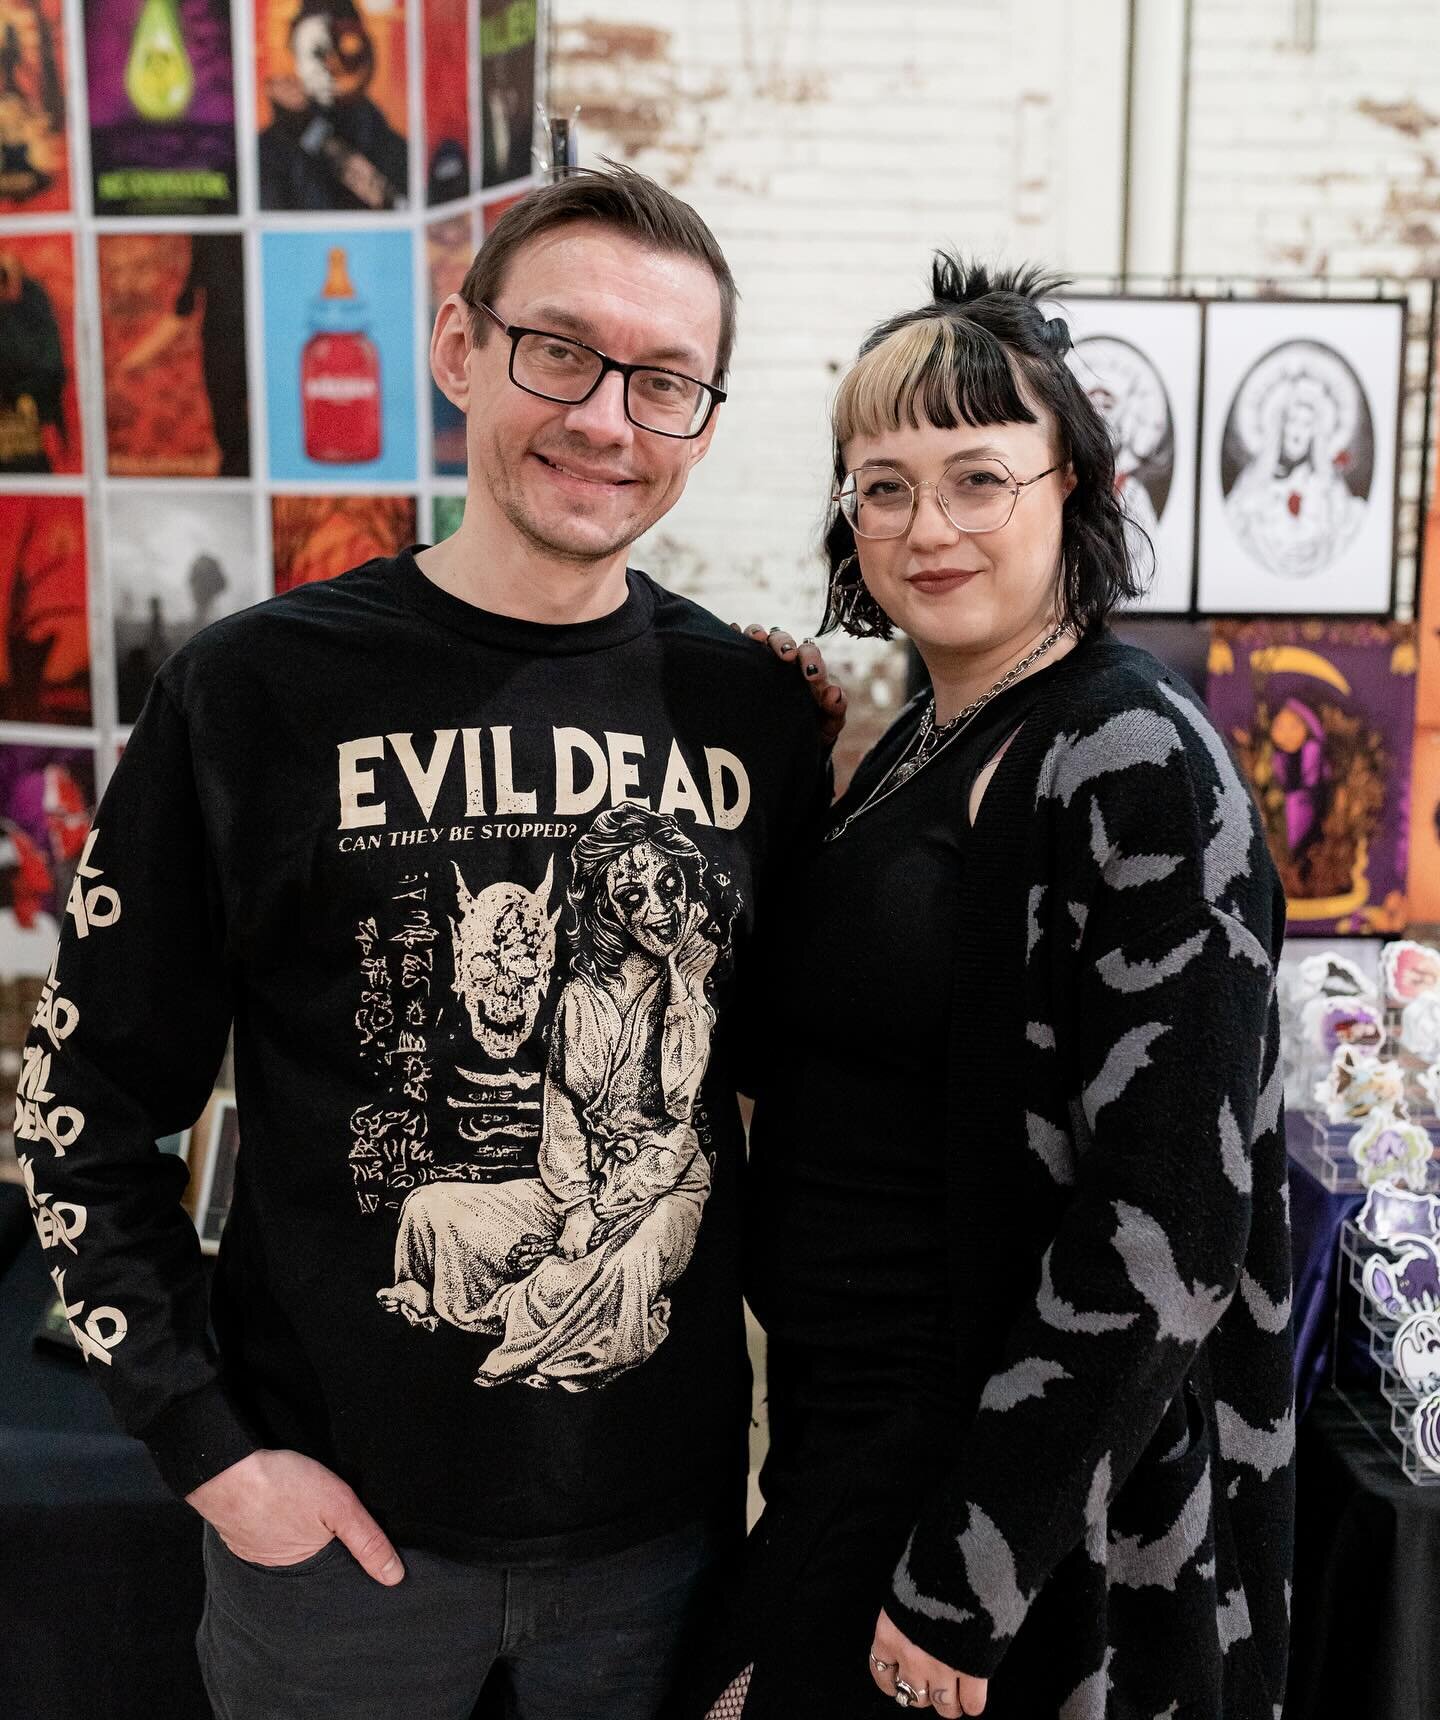 Obsessed with these market photos by @thegreenphotograph from the Tainted Love Market hosted by @altstreetmarket earlier this month! 

Always love the opportunity to have cute pics with my honey 💖🦇